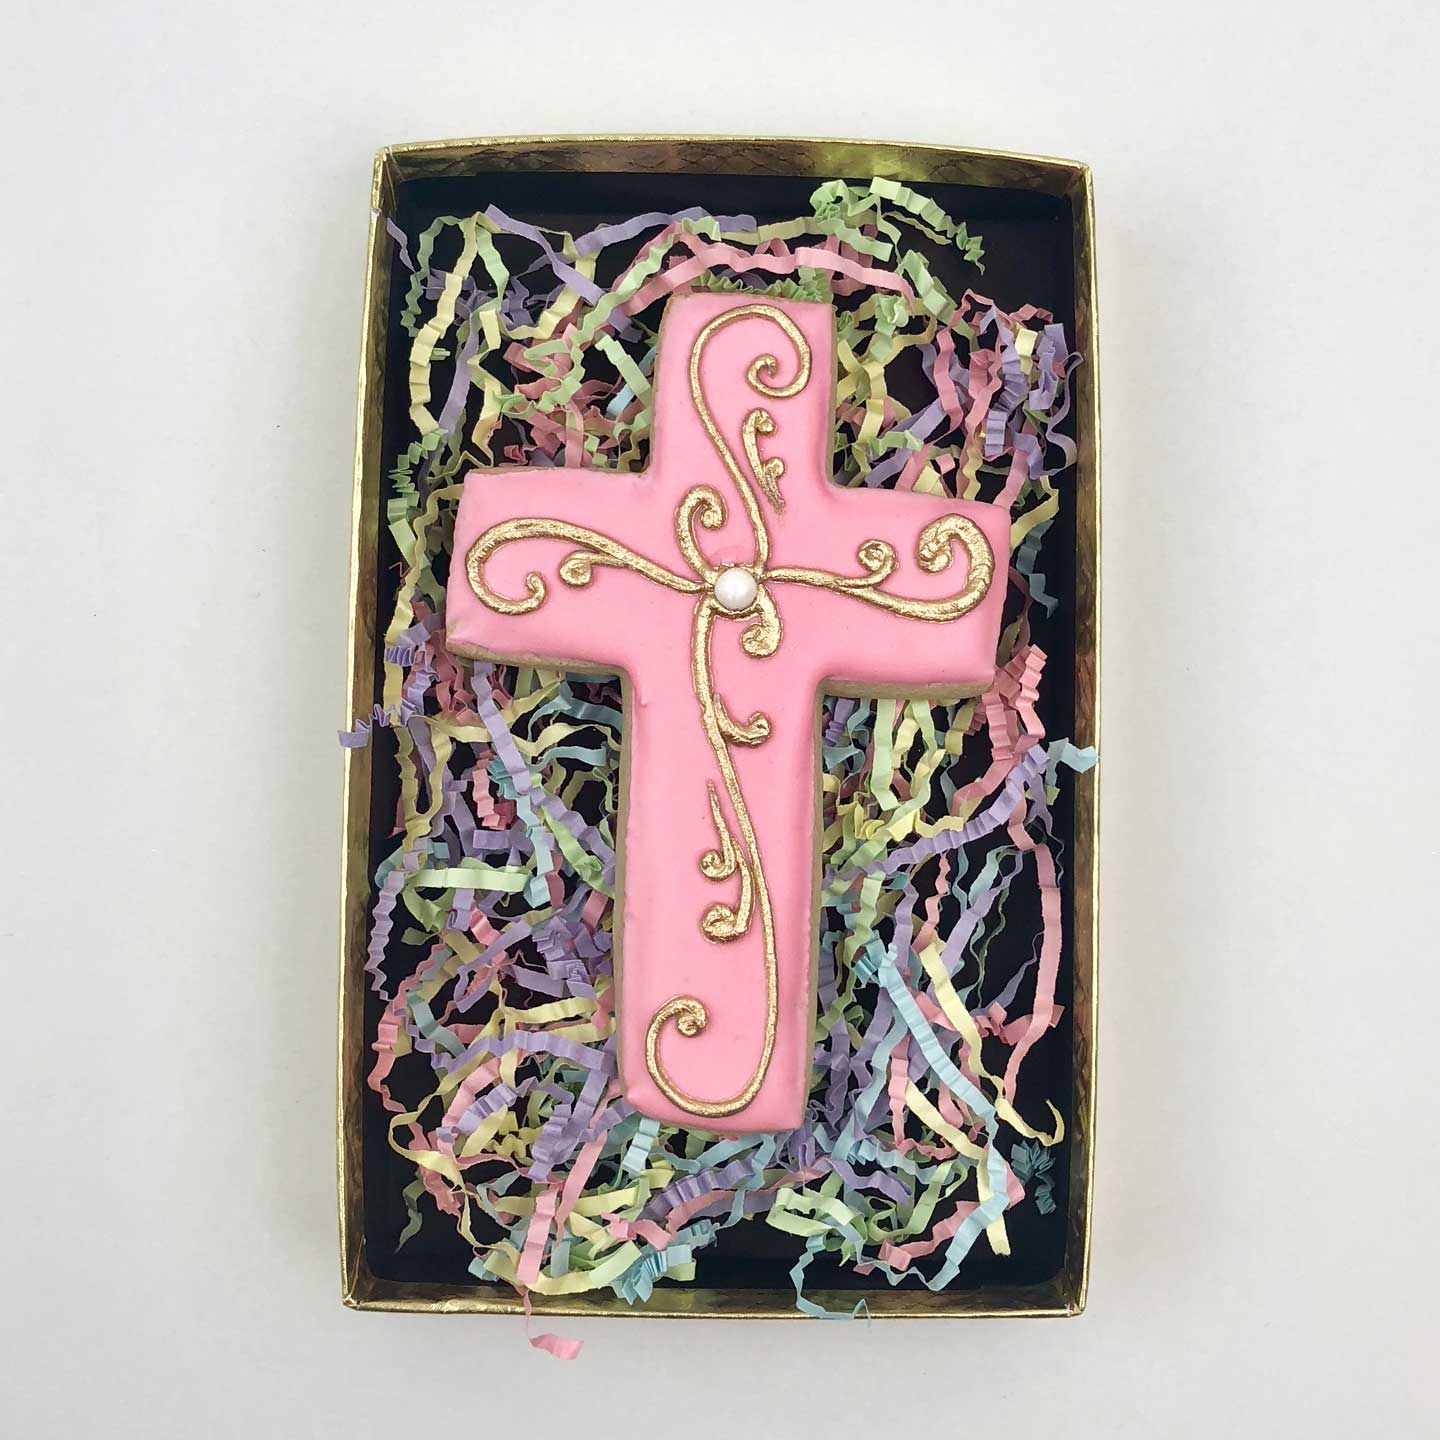 Decorated pink Cross Cookie in a box